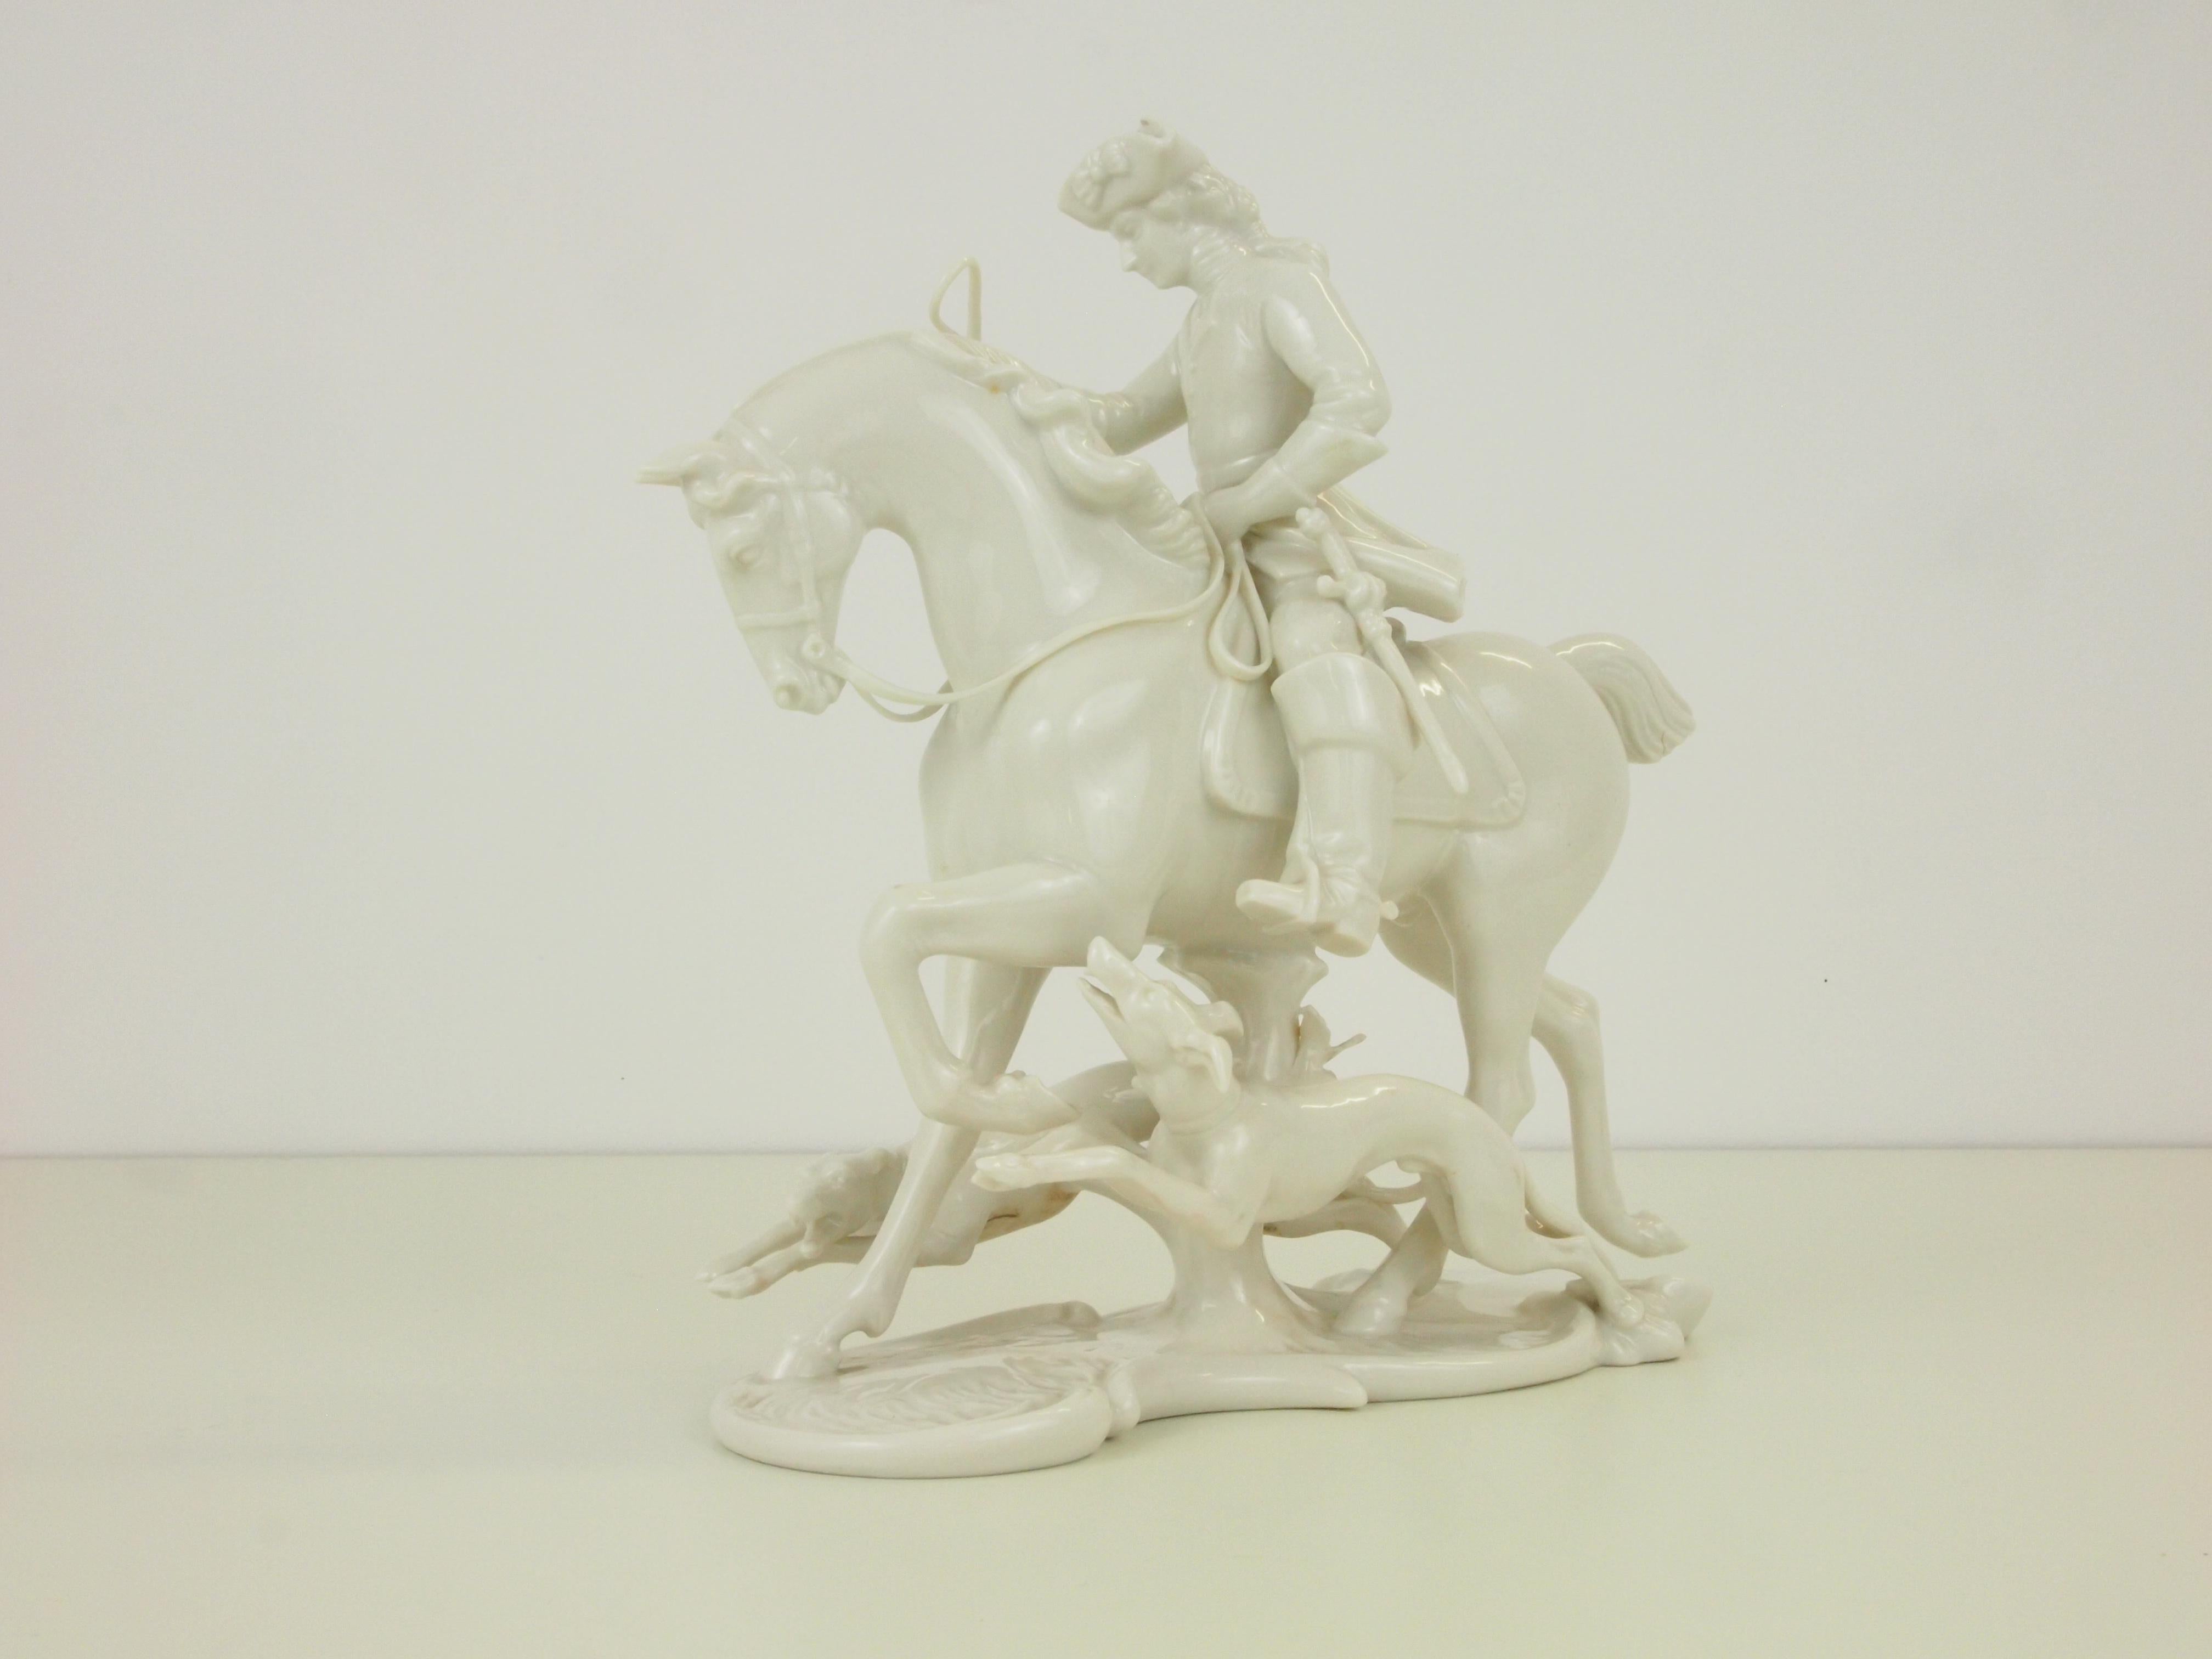 Romantic Nymphenburg Porcelain Figurine Depicting a Horse Rider in a Hunting Scene For Sale